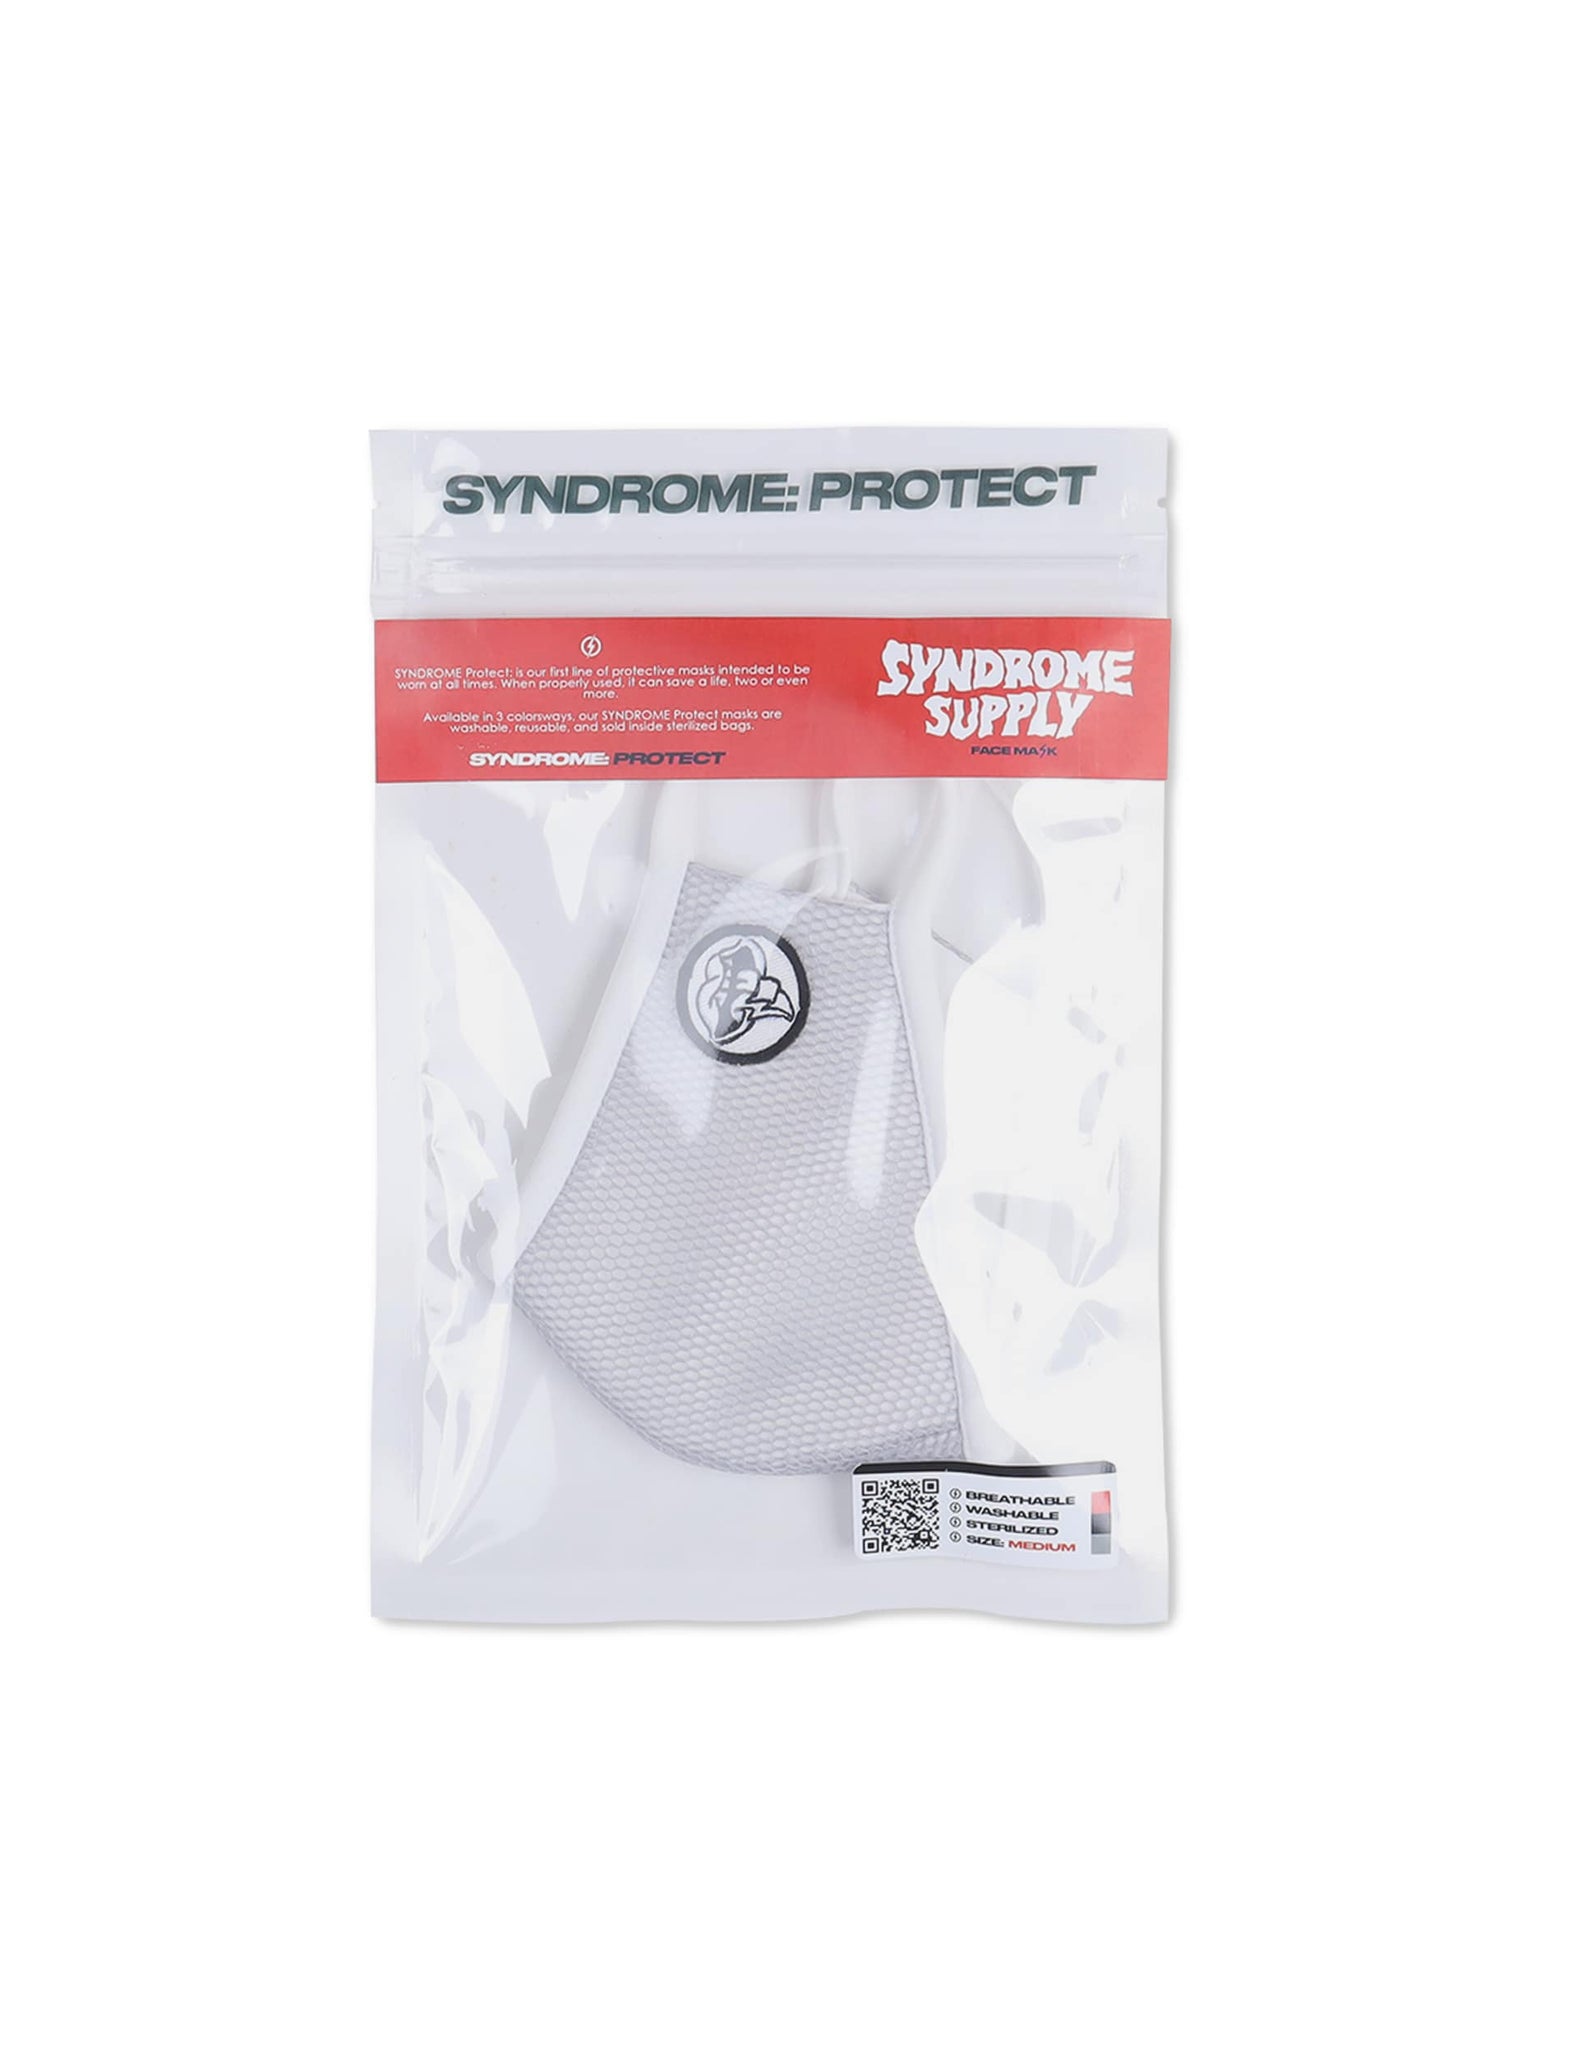 Syndrome Face Mask: Icy White